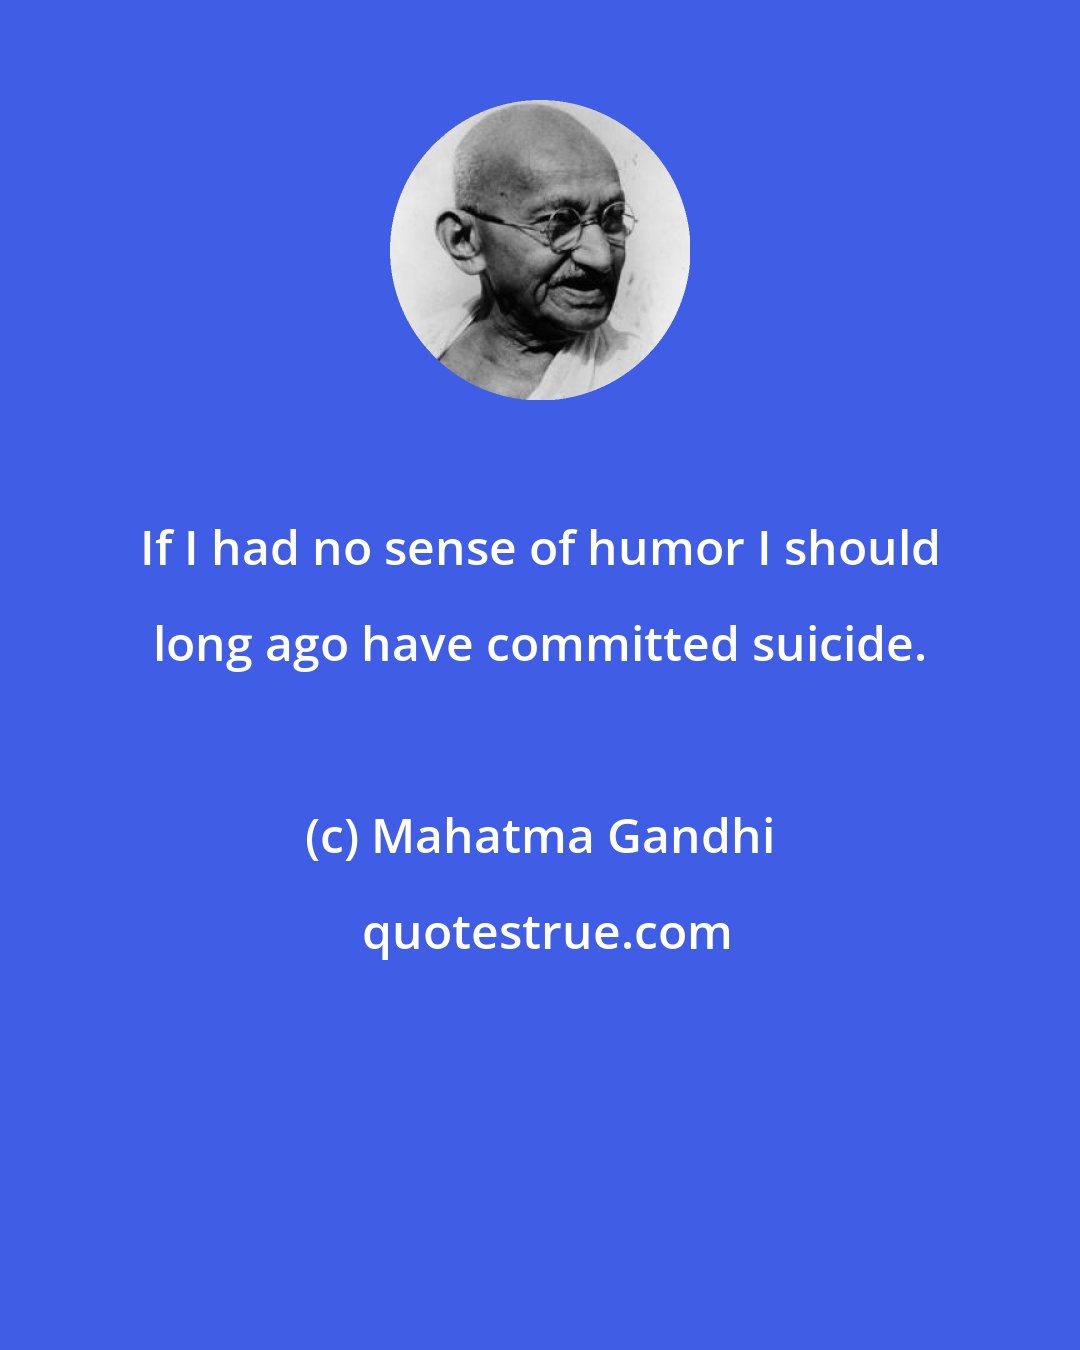 Mahatma Gandhi: If I had no sense of humor I should long ago have committed suicide.